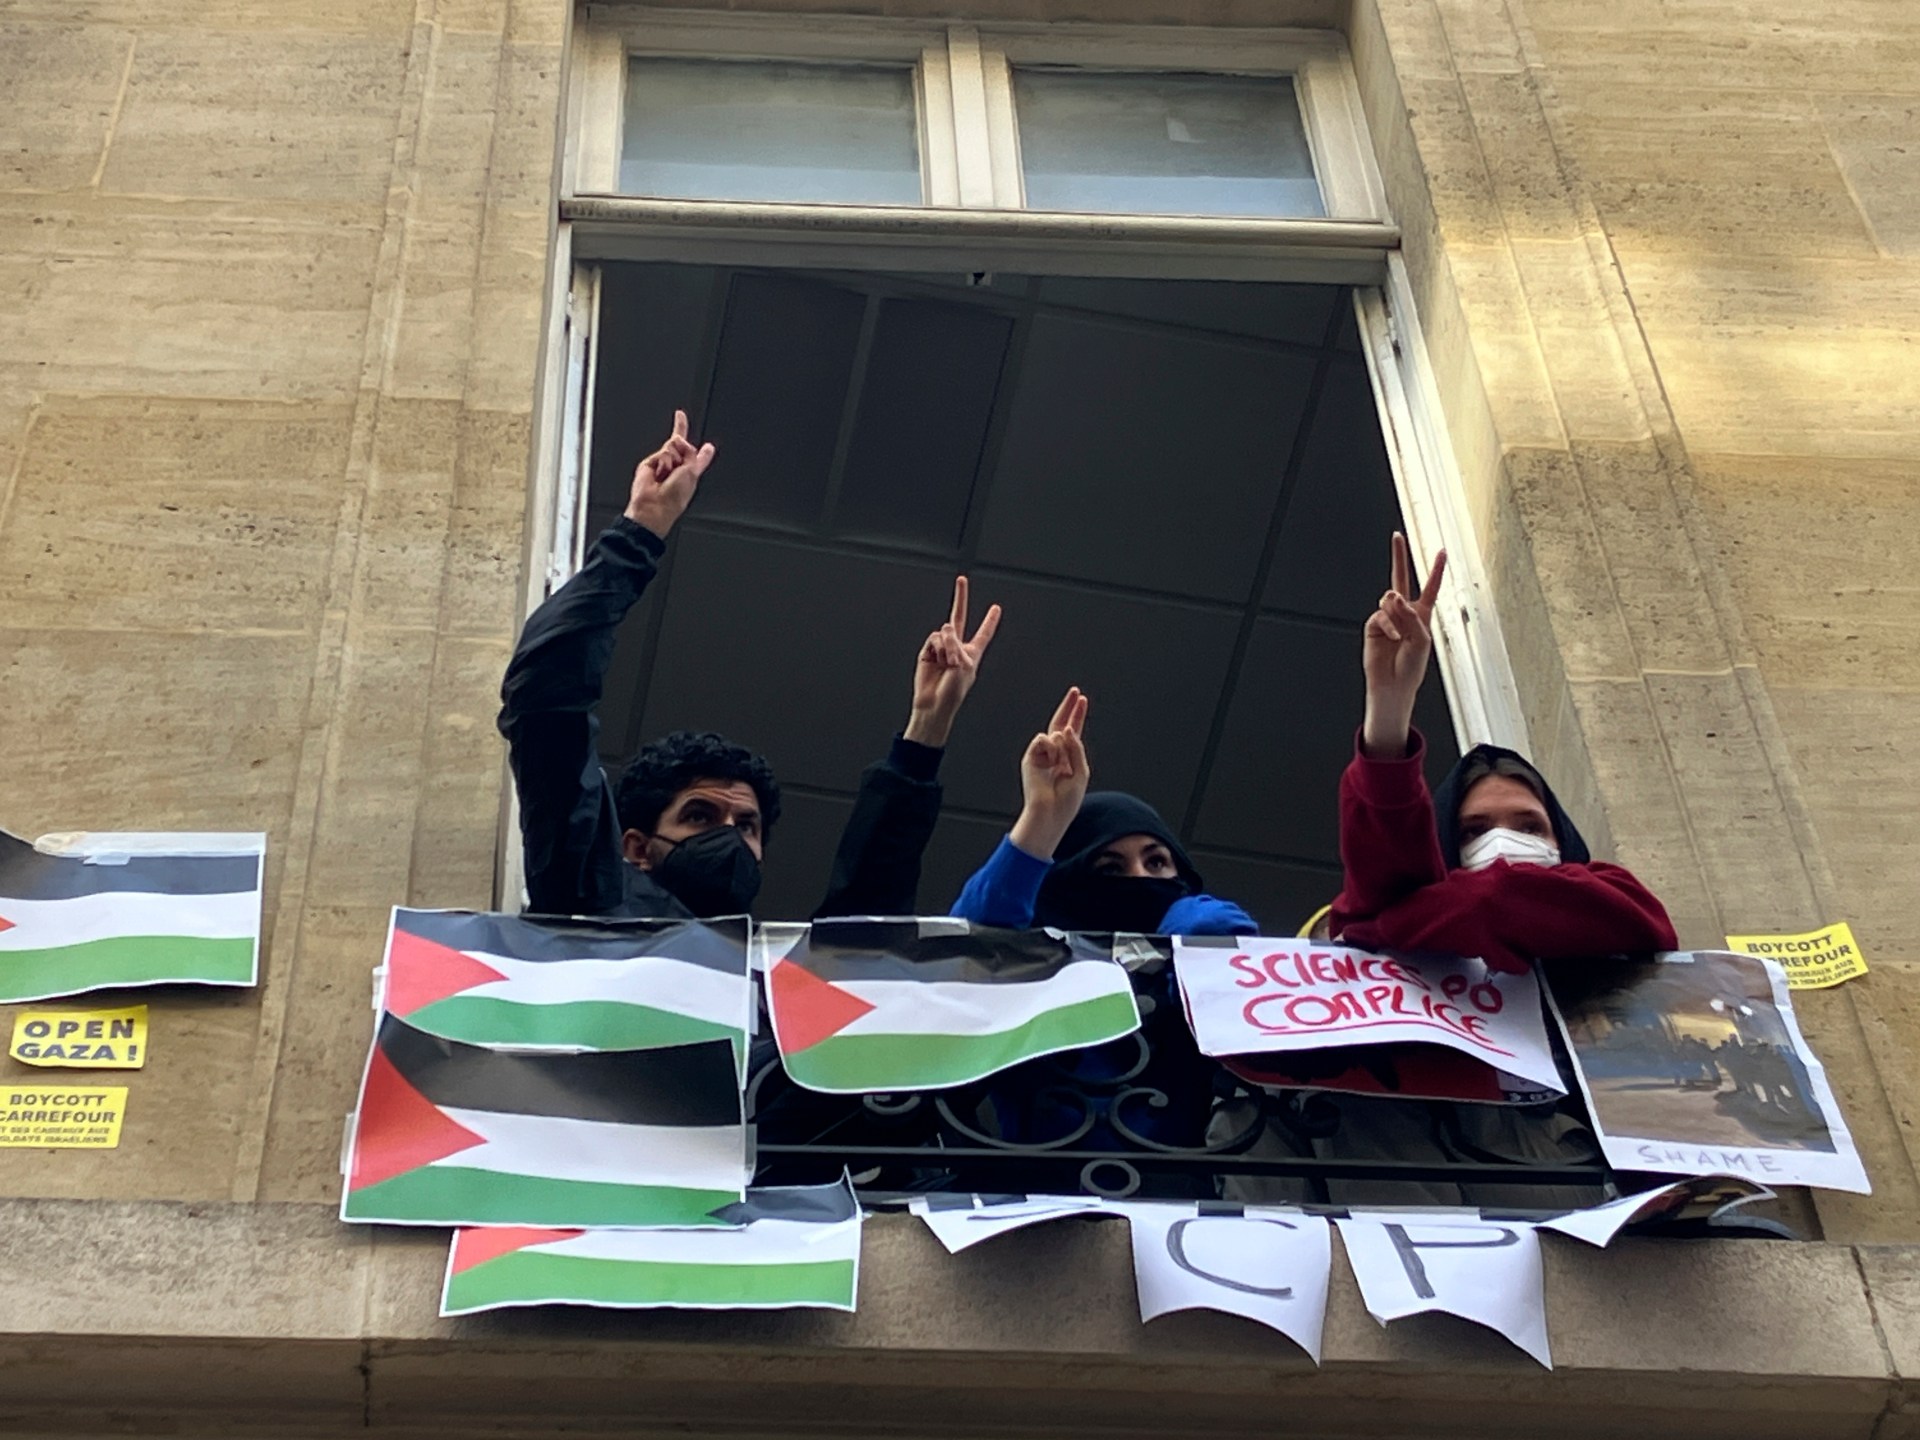 Protesters at Sciences Po block campus to denounce Israel’s actions in Gaza